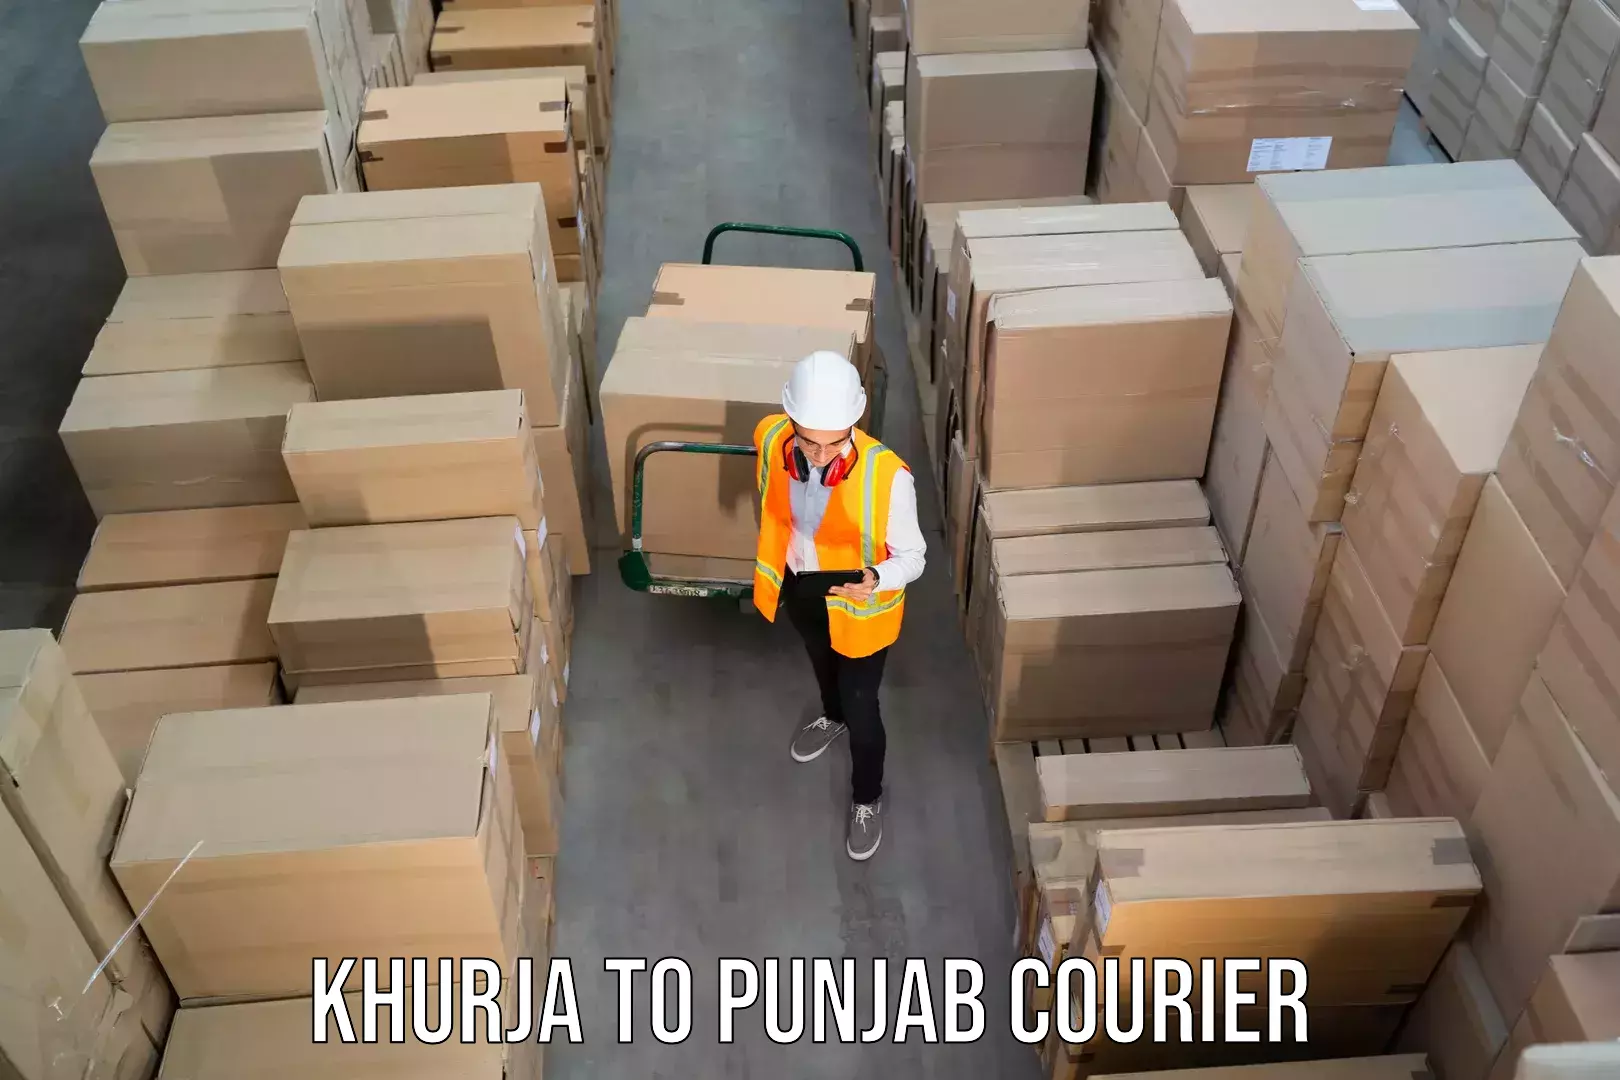 Round-the-clock parcel delivery Khurja to Bathinda